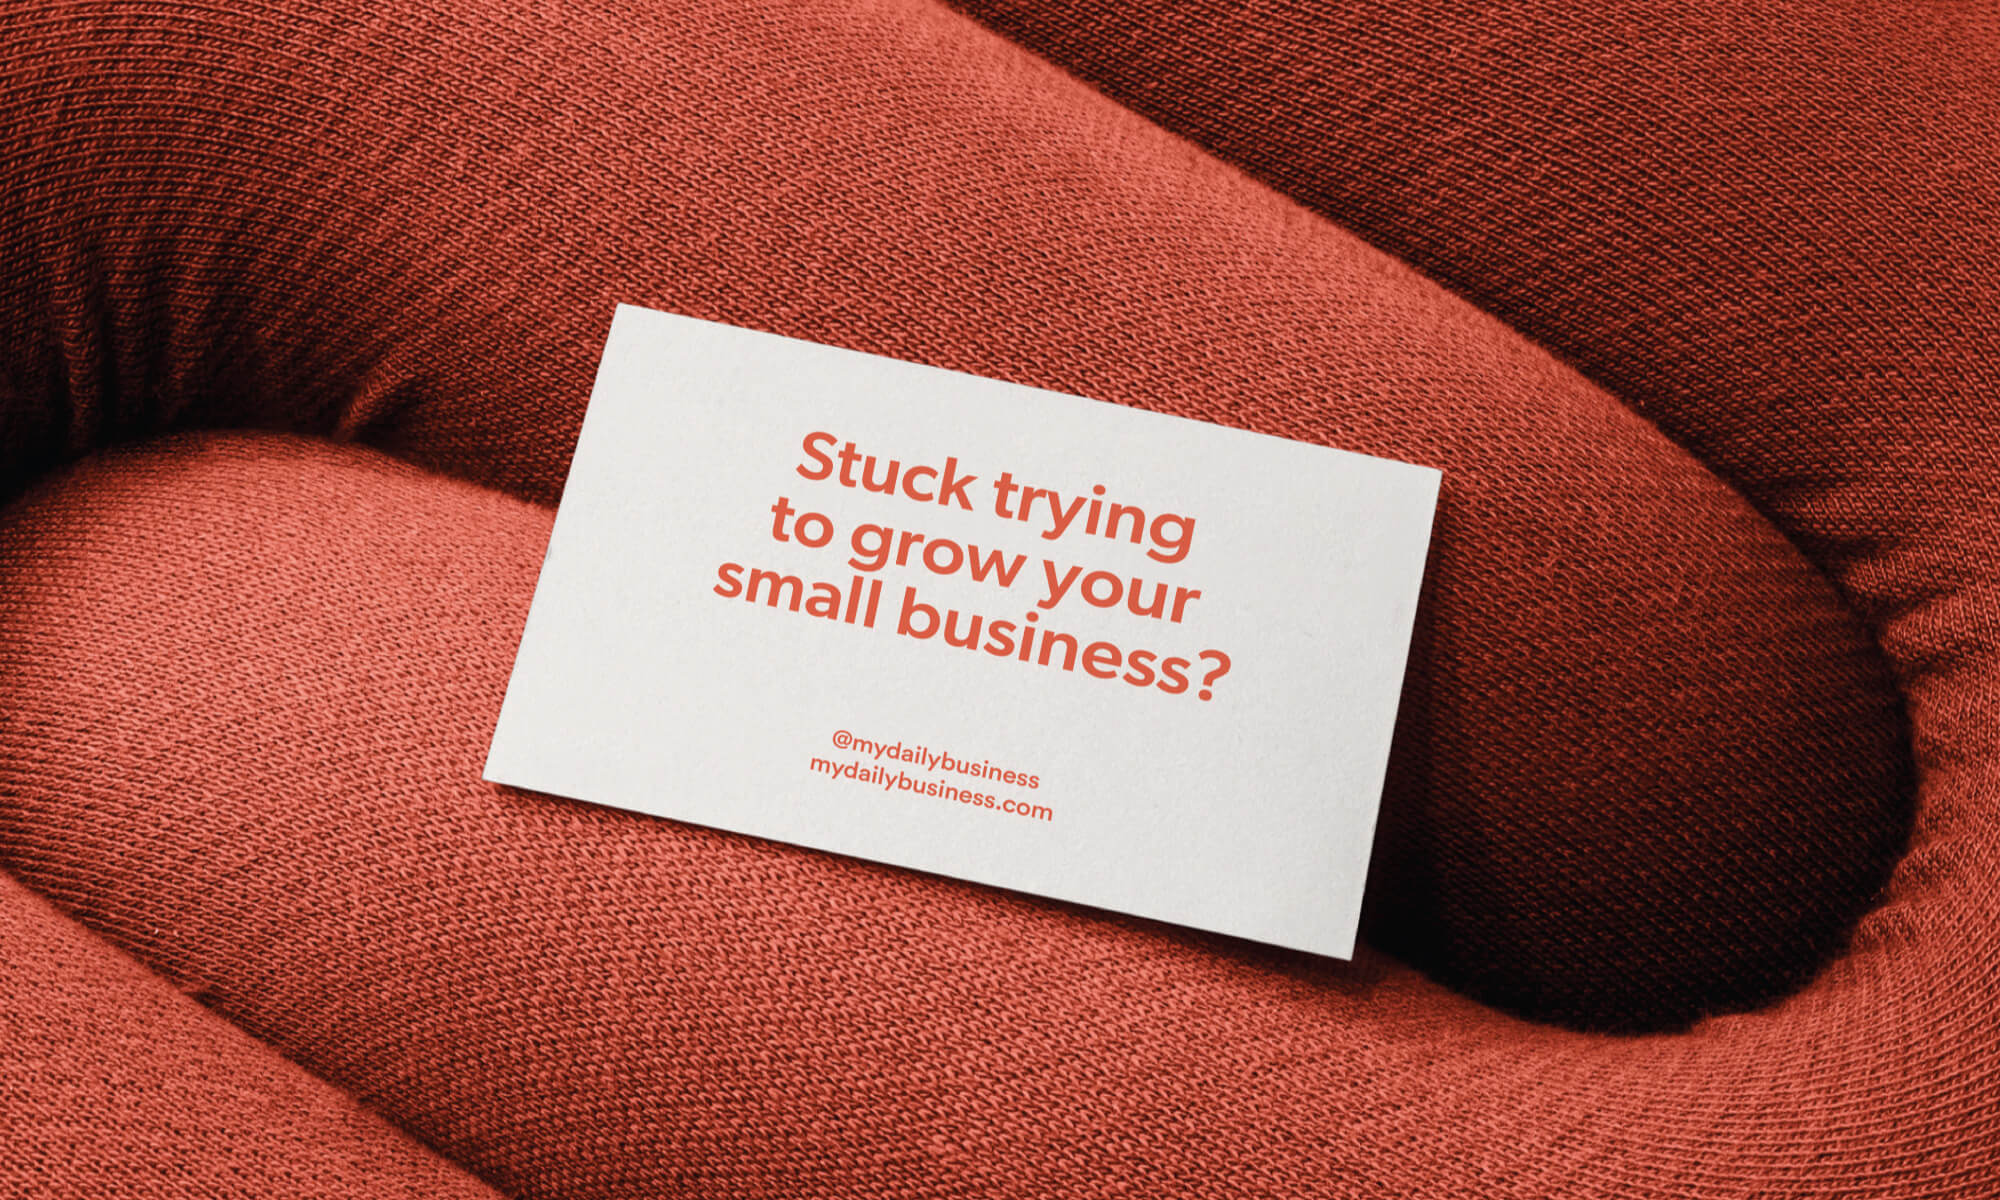 my daily business business card on red cusion